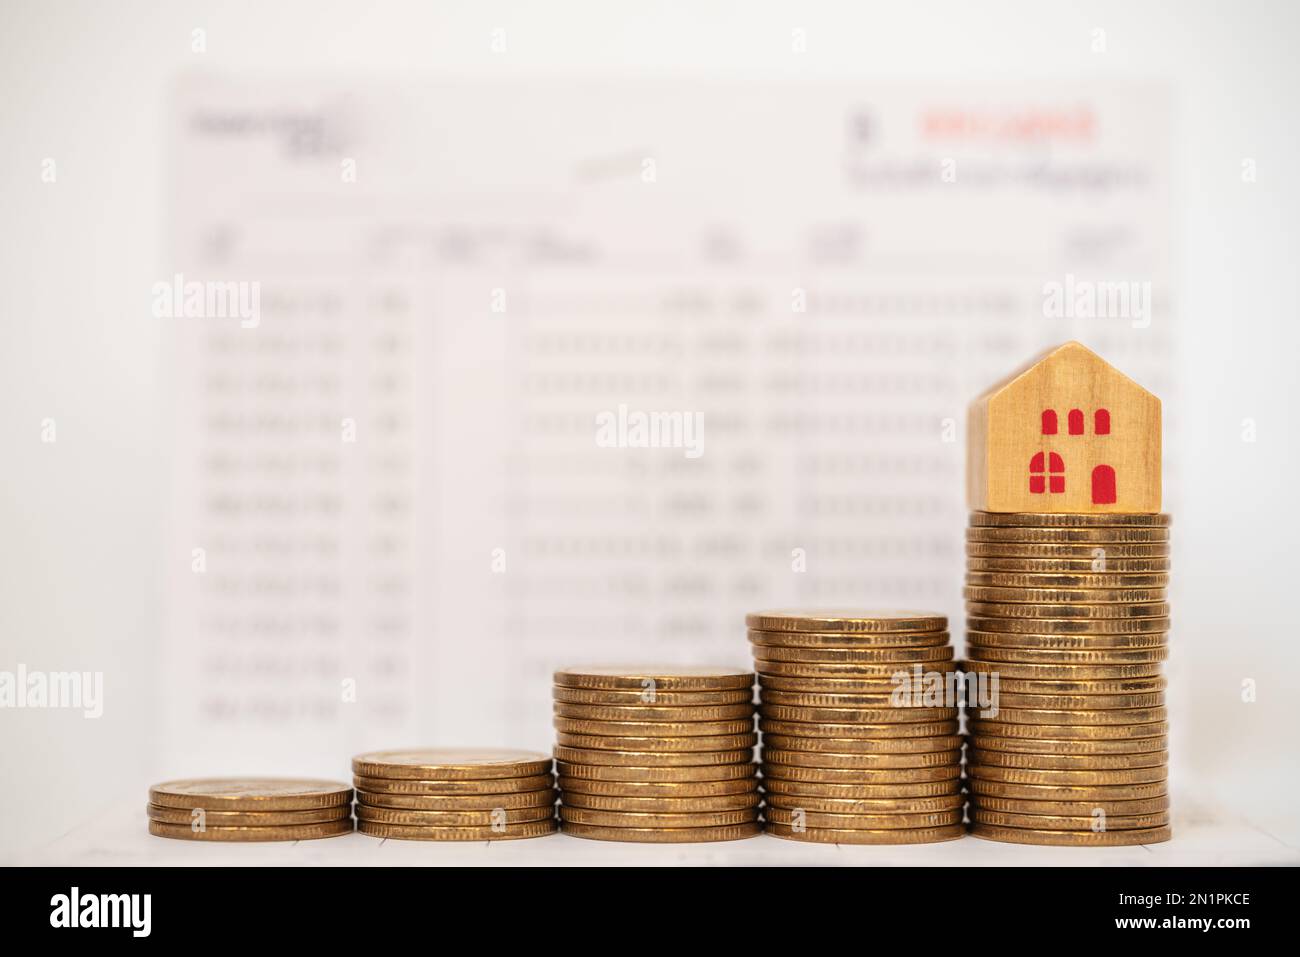 Business, Saving and Home Loan Concept. Closeup of wooden house toy on top of stack of gold coins on bank passbook as background. Stock Photo